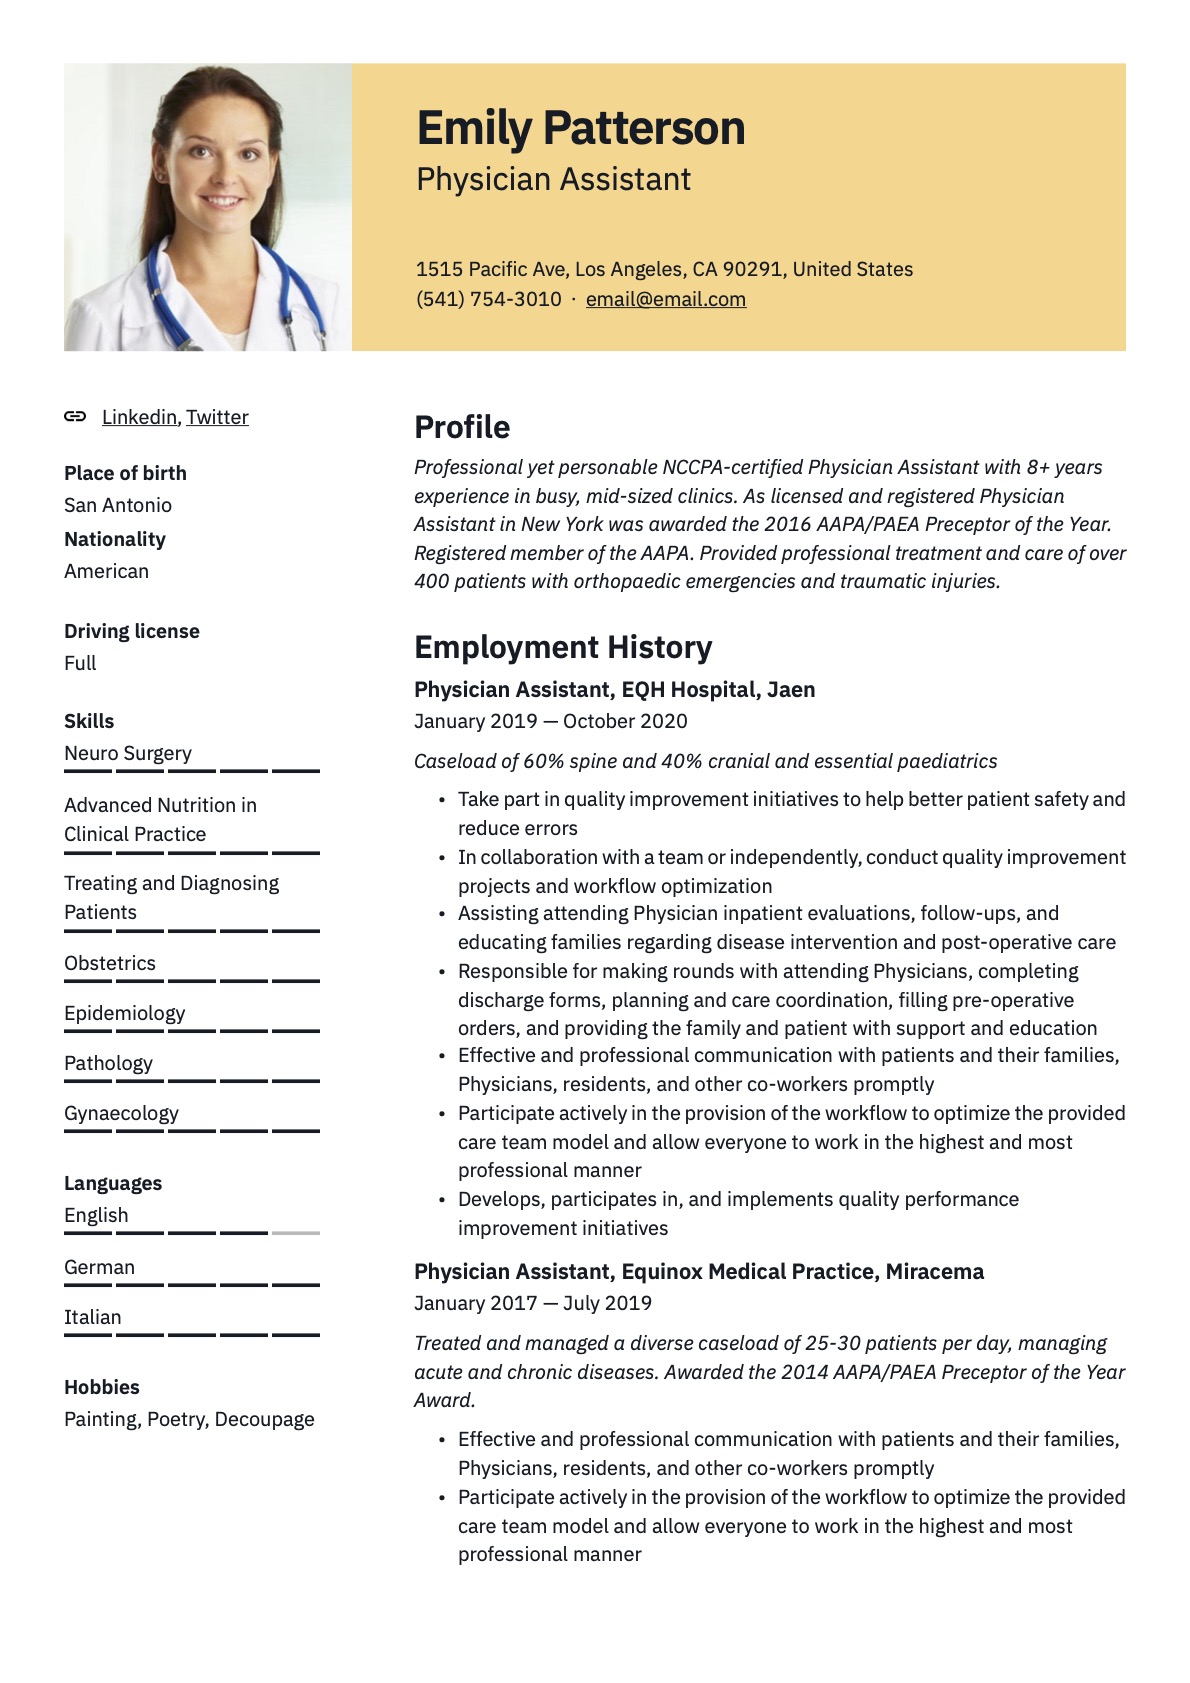 Example Resume Physician Assistant-3